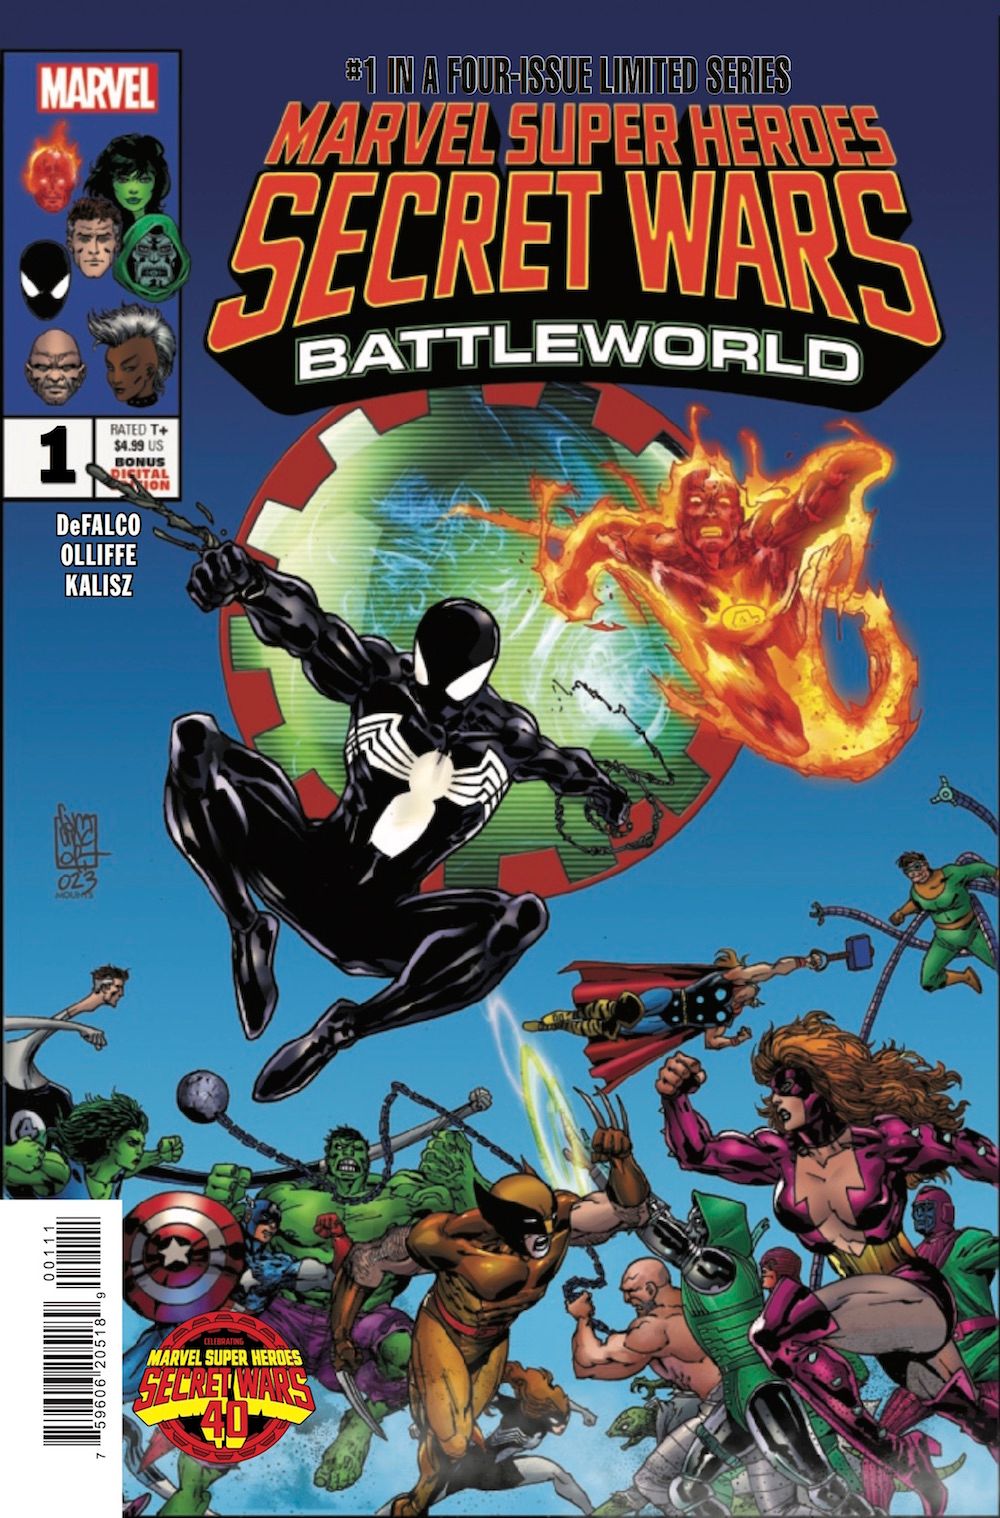 Excerpt from the cover of Marvel Heroes Secret War Battleworld #1, Spider-Man in his black costume and the Human Torch flying side by side overhead the ensuing battle royale of Marvel heroes and villains.